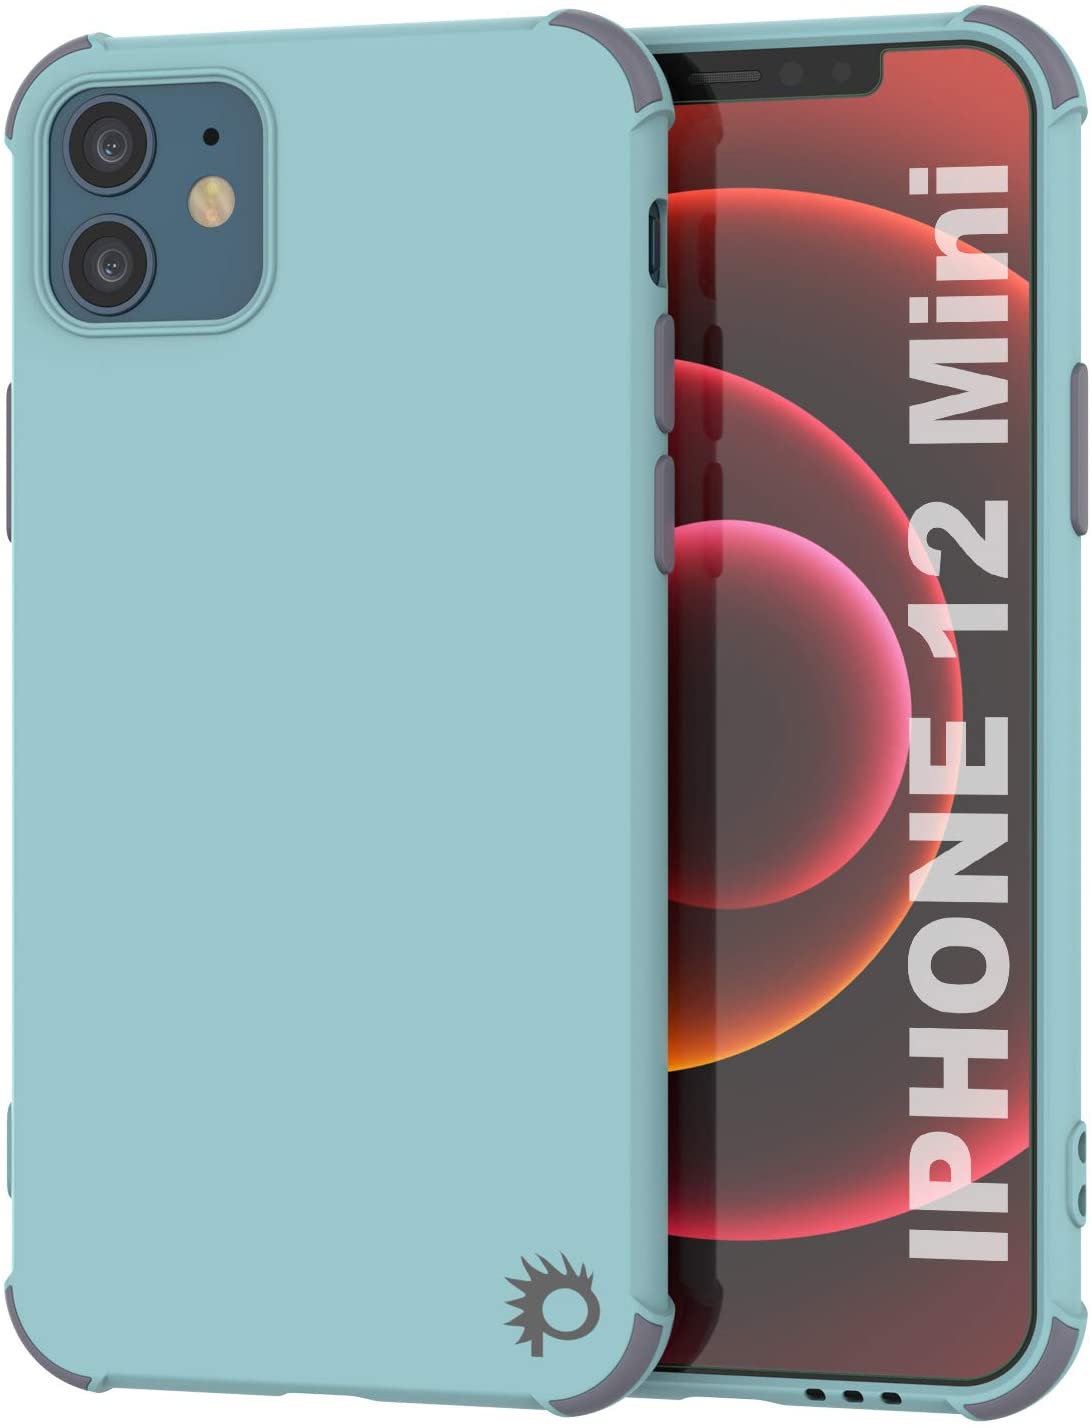 Punkcase Protective & Lightweight TPU Case [Sunshine Series] for iPhone 12 Mini [Teal] (Color in image: Teal)